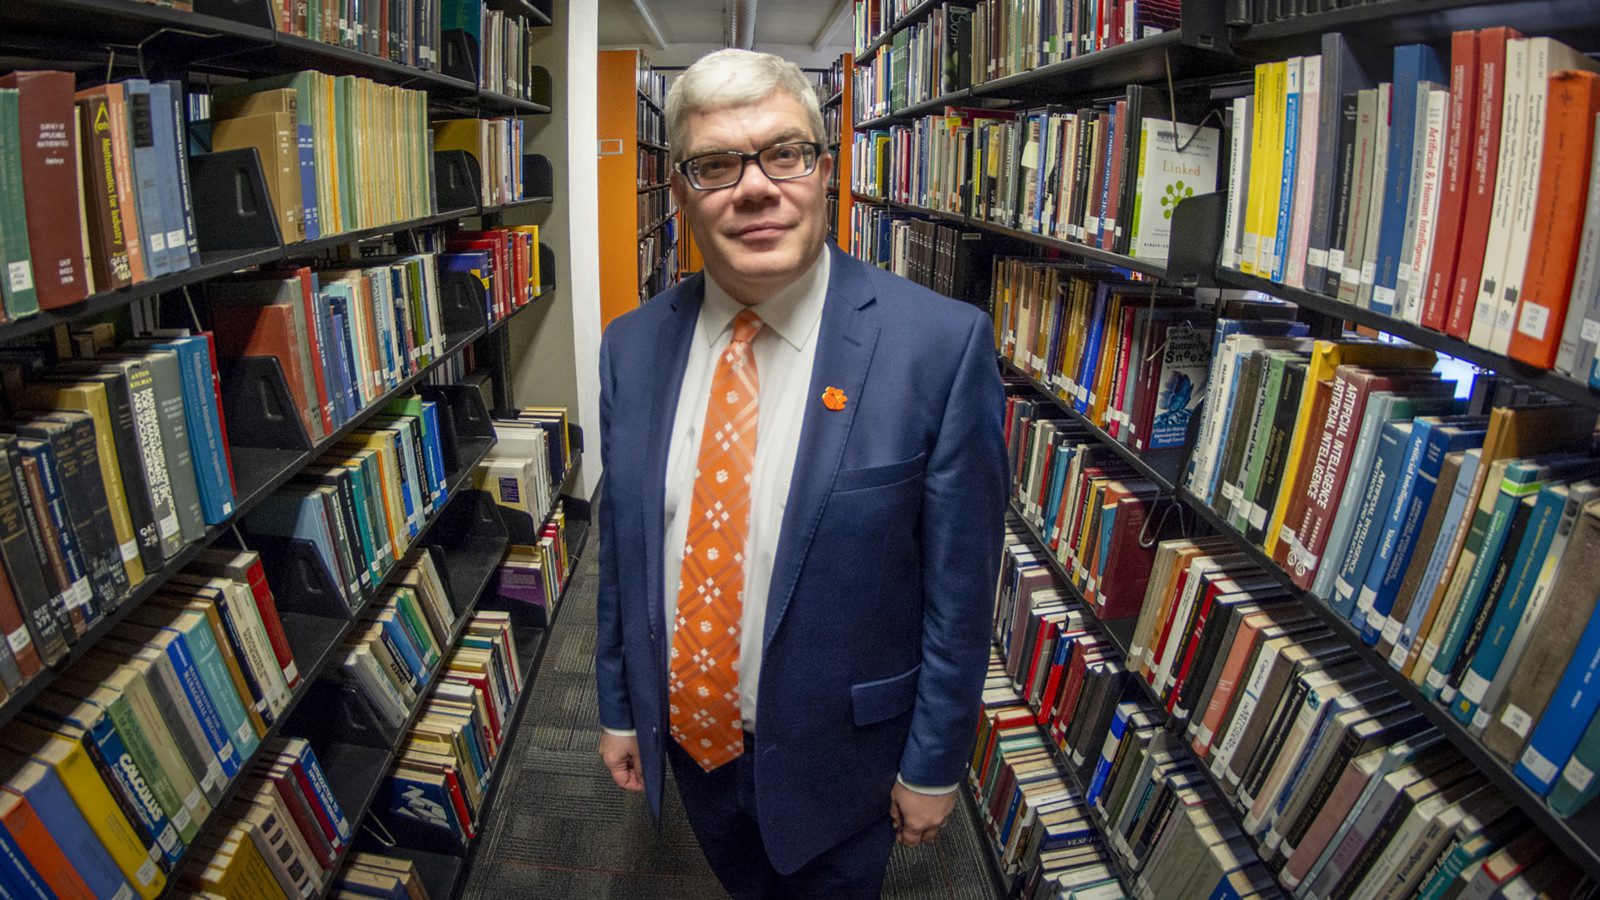 Dean Cox, in a dark blue suit with orange tie, stands between two bookshelves full of books.